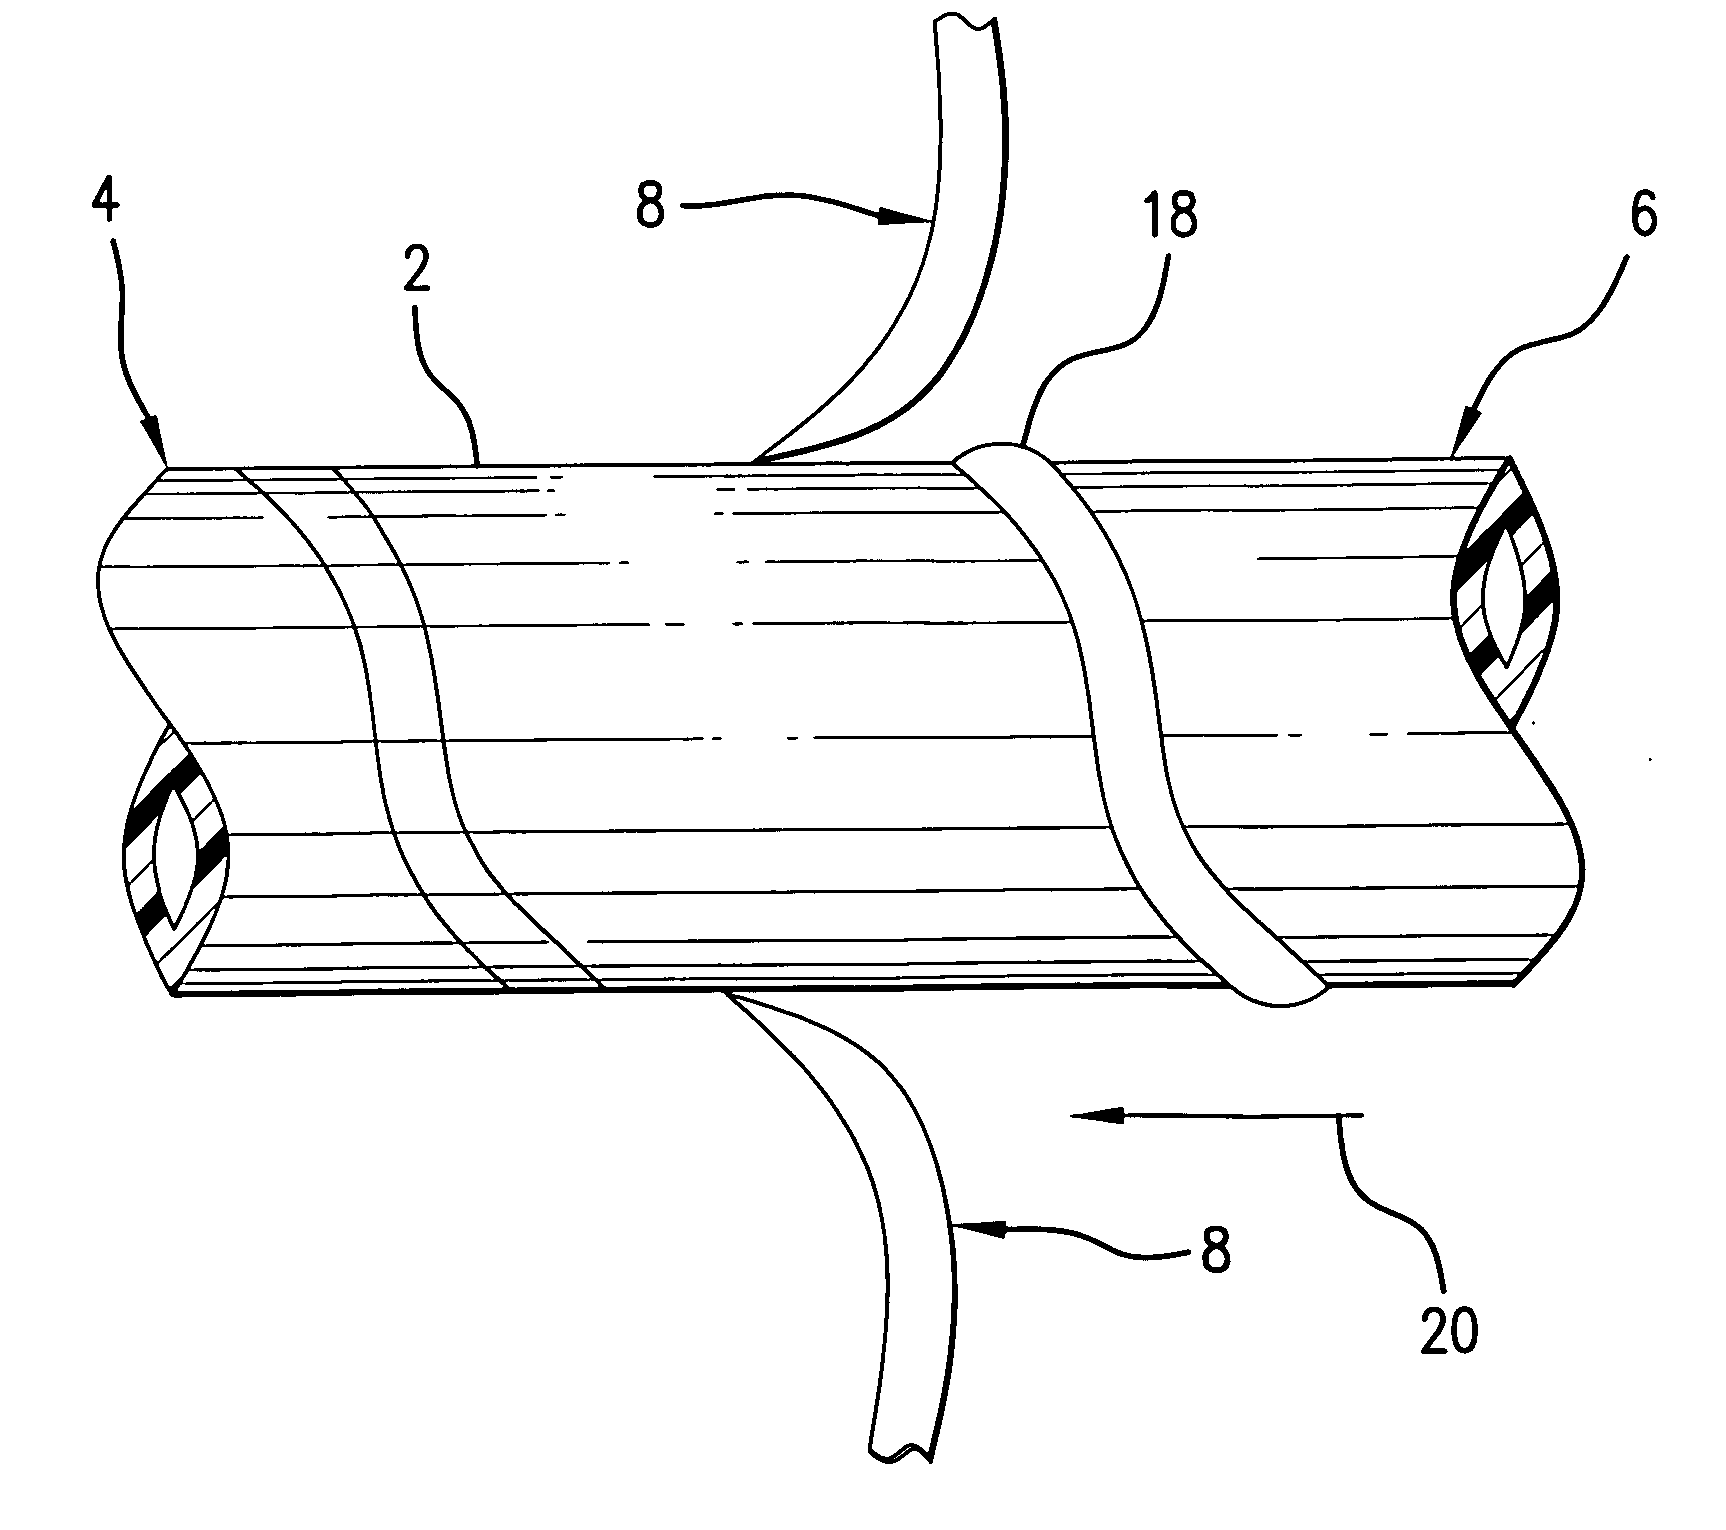 Polymer tube with embedded electrically conductive patterns and method for providing electrically conductive paths in polymer tubing